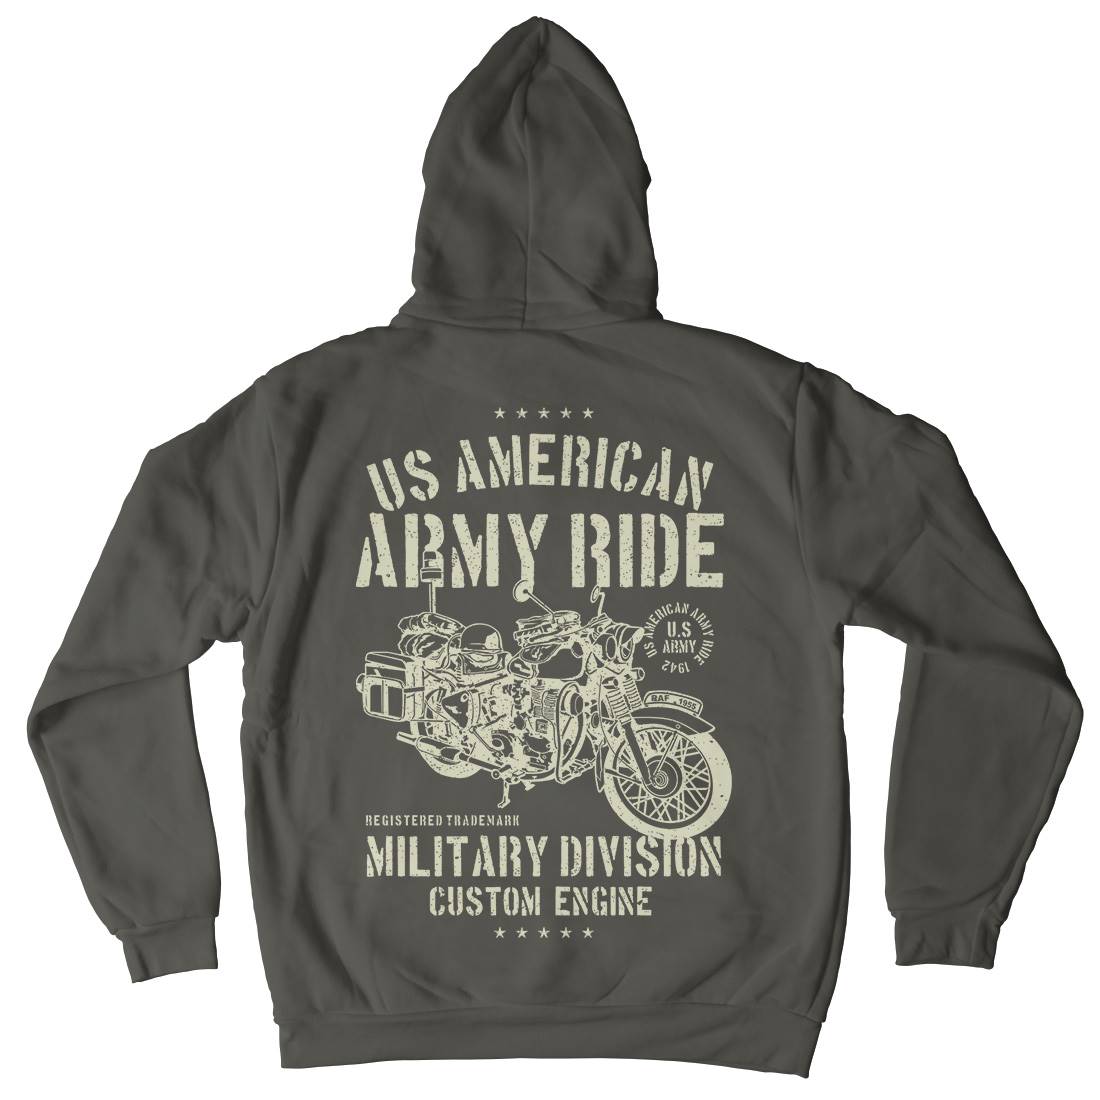 Ride Kids Crew Neck Hoodie Army A613